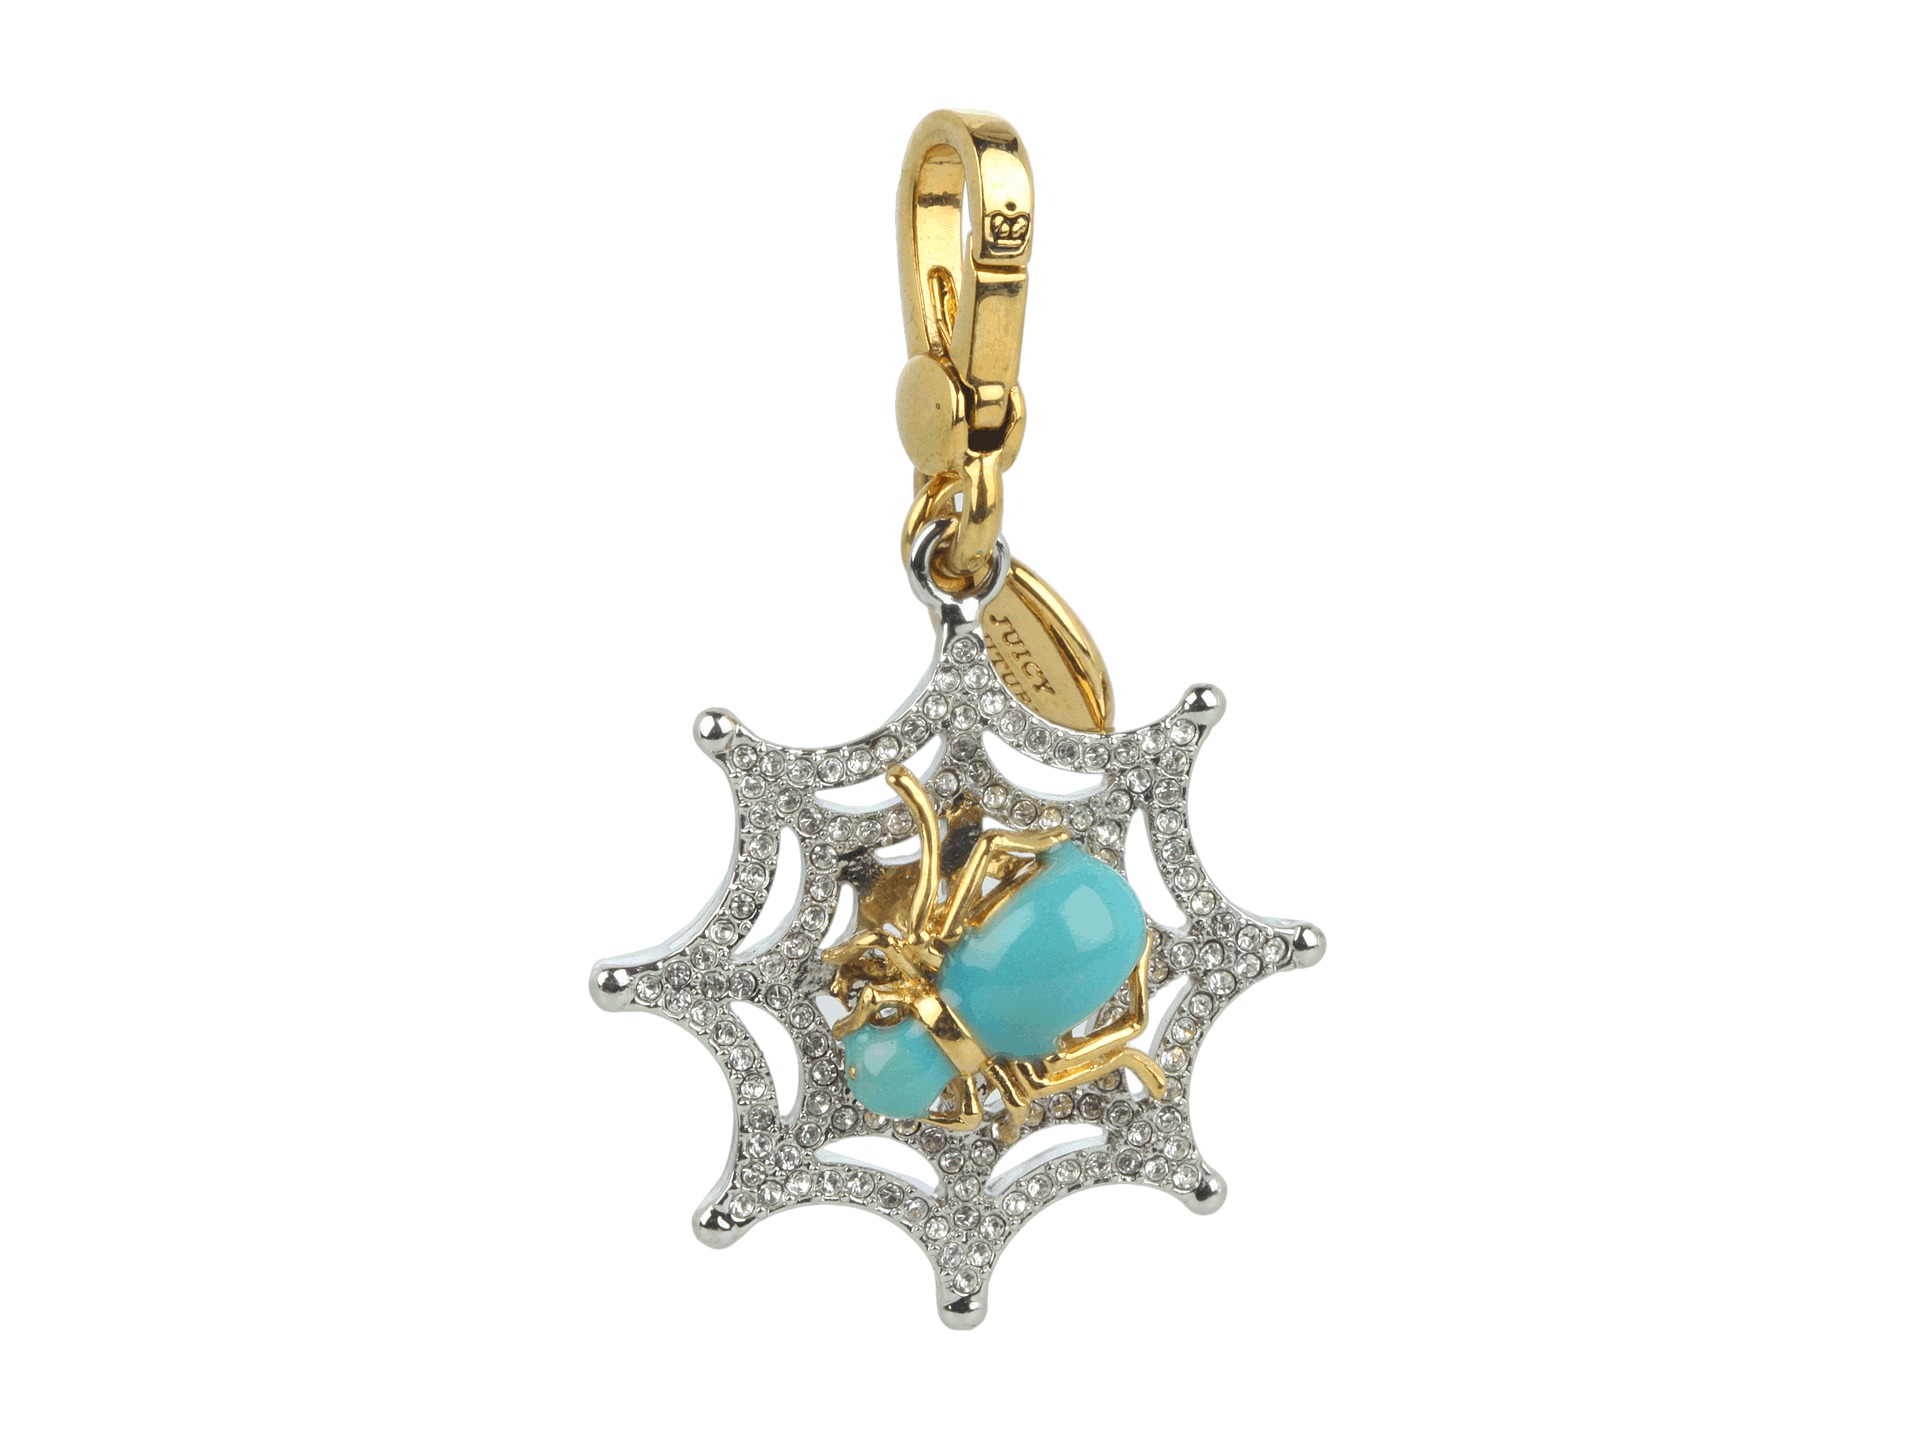   Limited Edition Glow In The Dark Spider Web Charm $55.99 $62.00 SALE